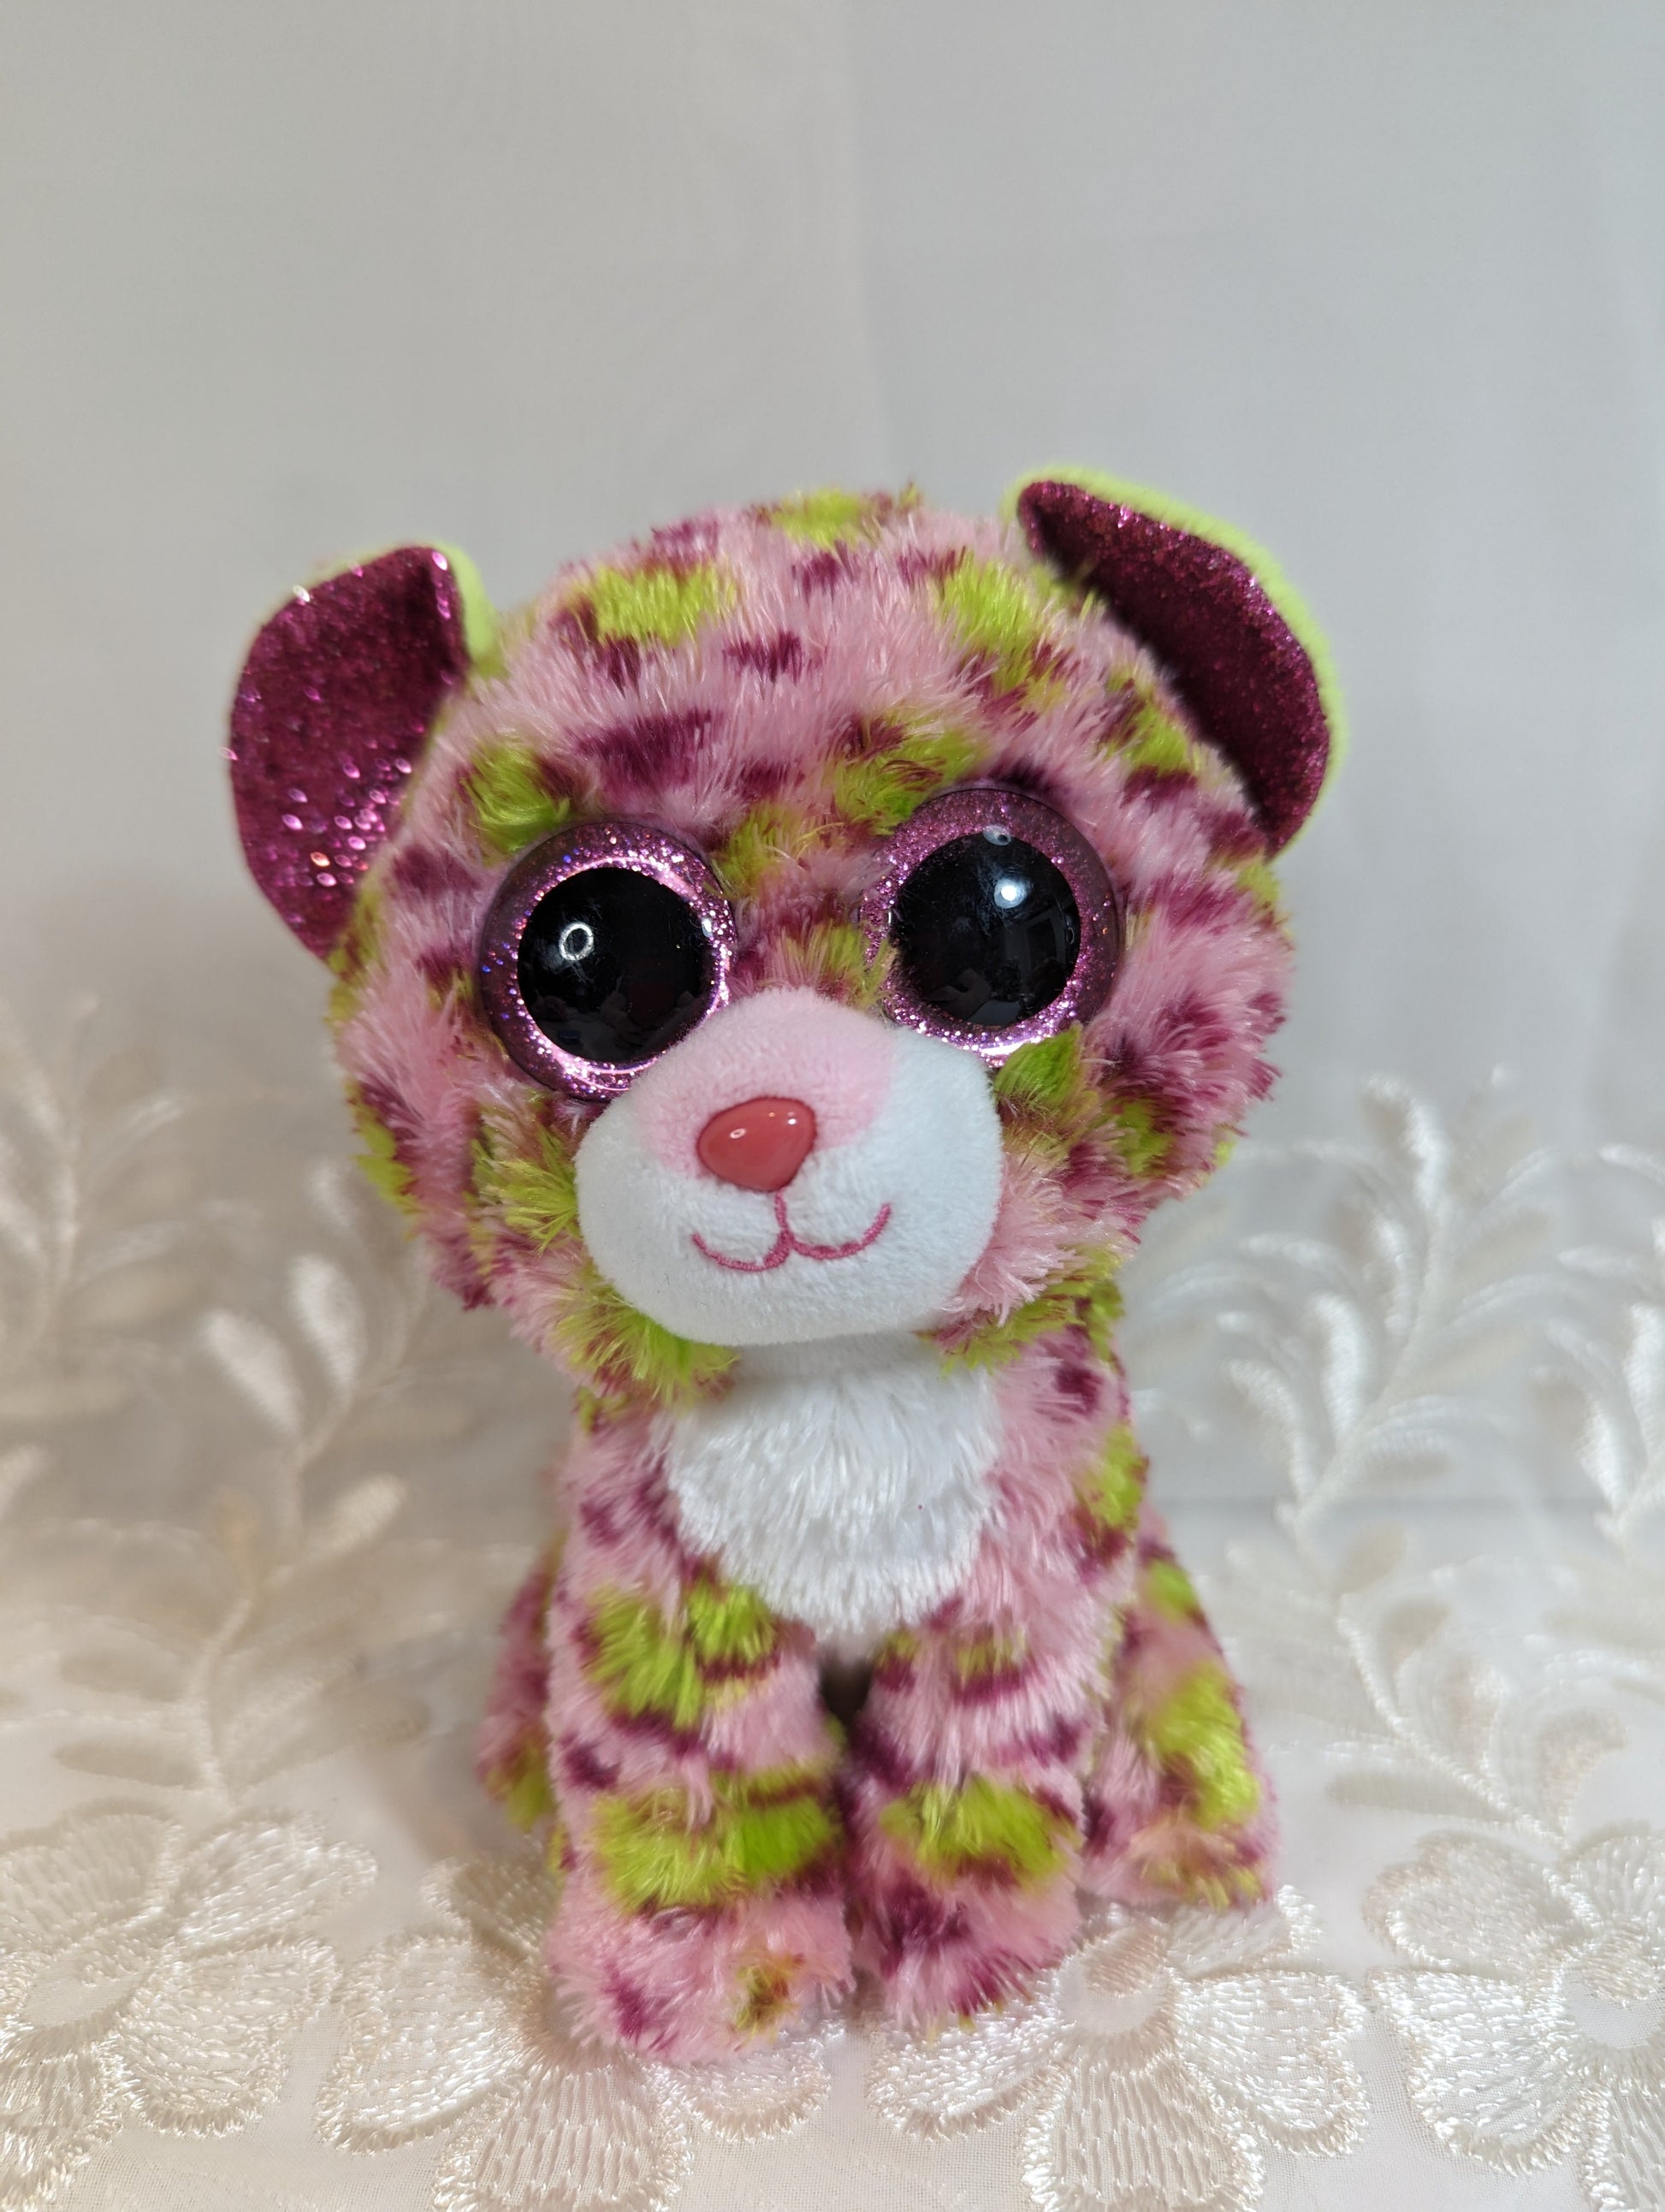 Ty Beanie Boo - Lainey The Leopard (6 in) No Tag / Scuffed Eyes - Vintage Beanies Canada